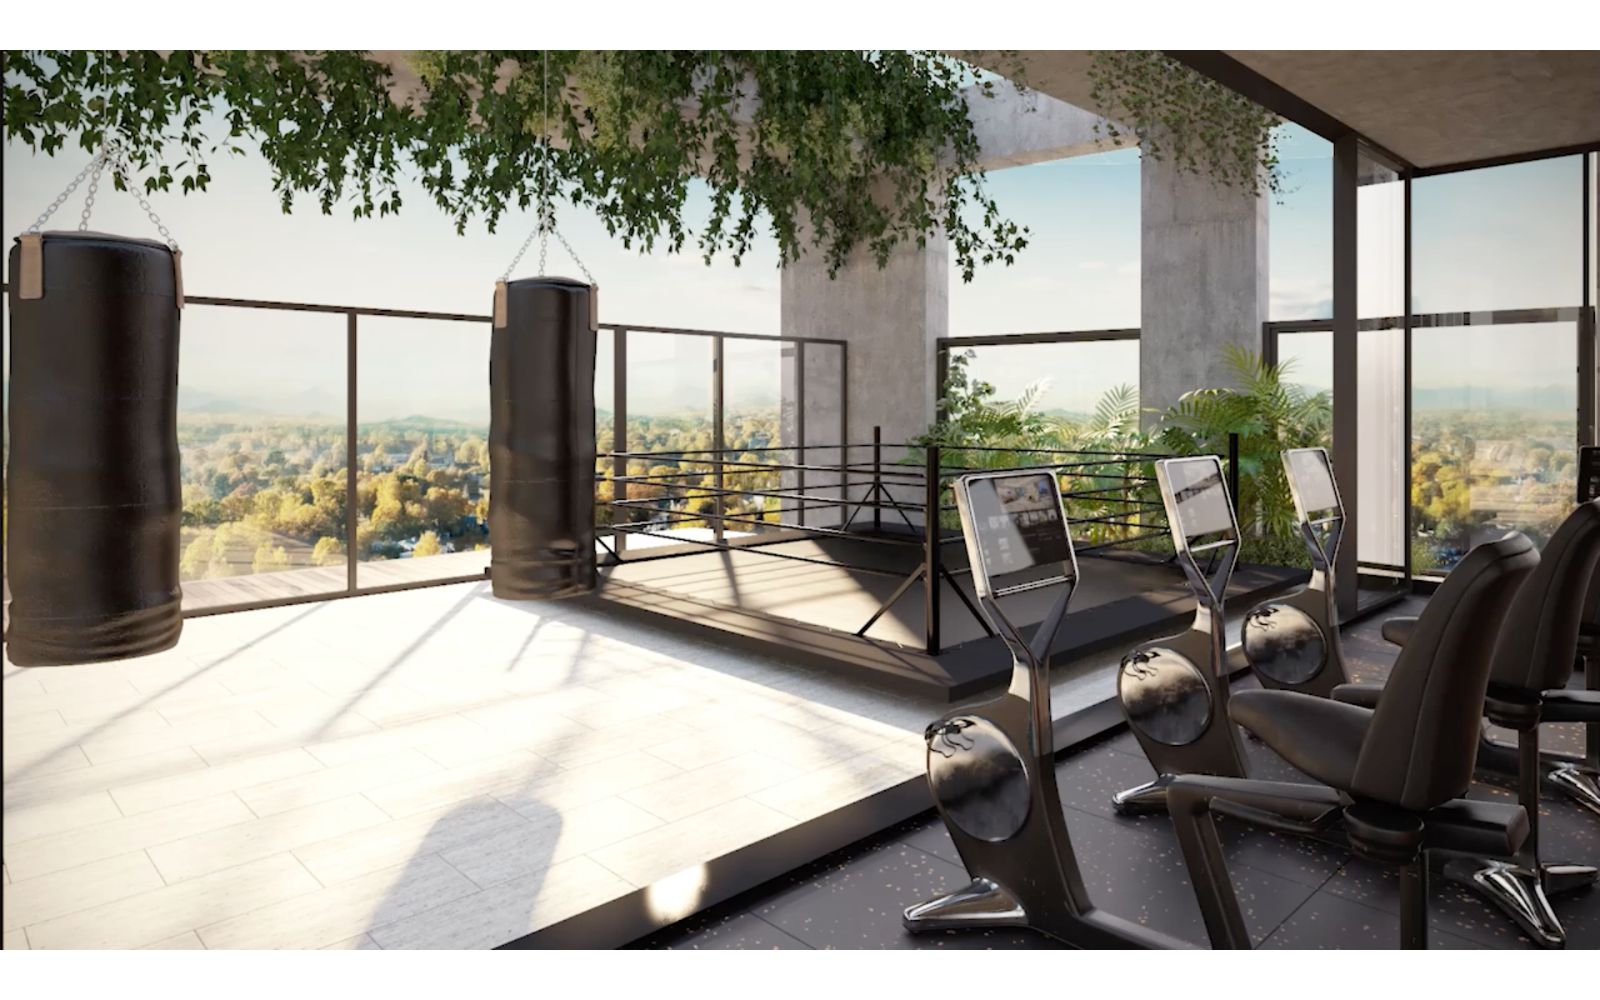 Luxury loft-style apartment, pool, terrace, gym, for sale in Roma Norte CDMX.